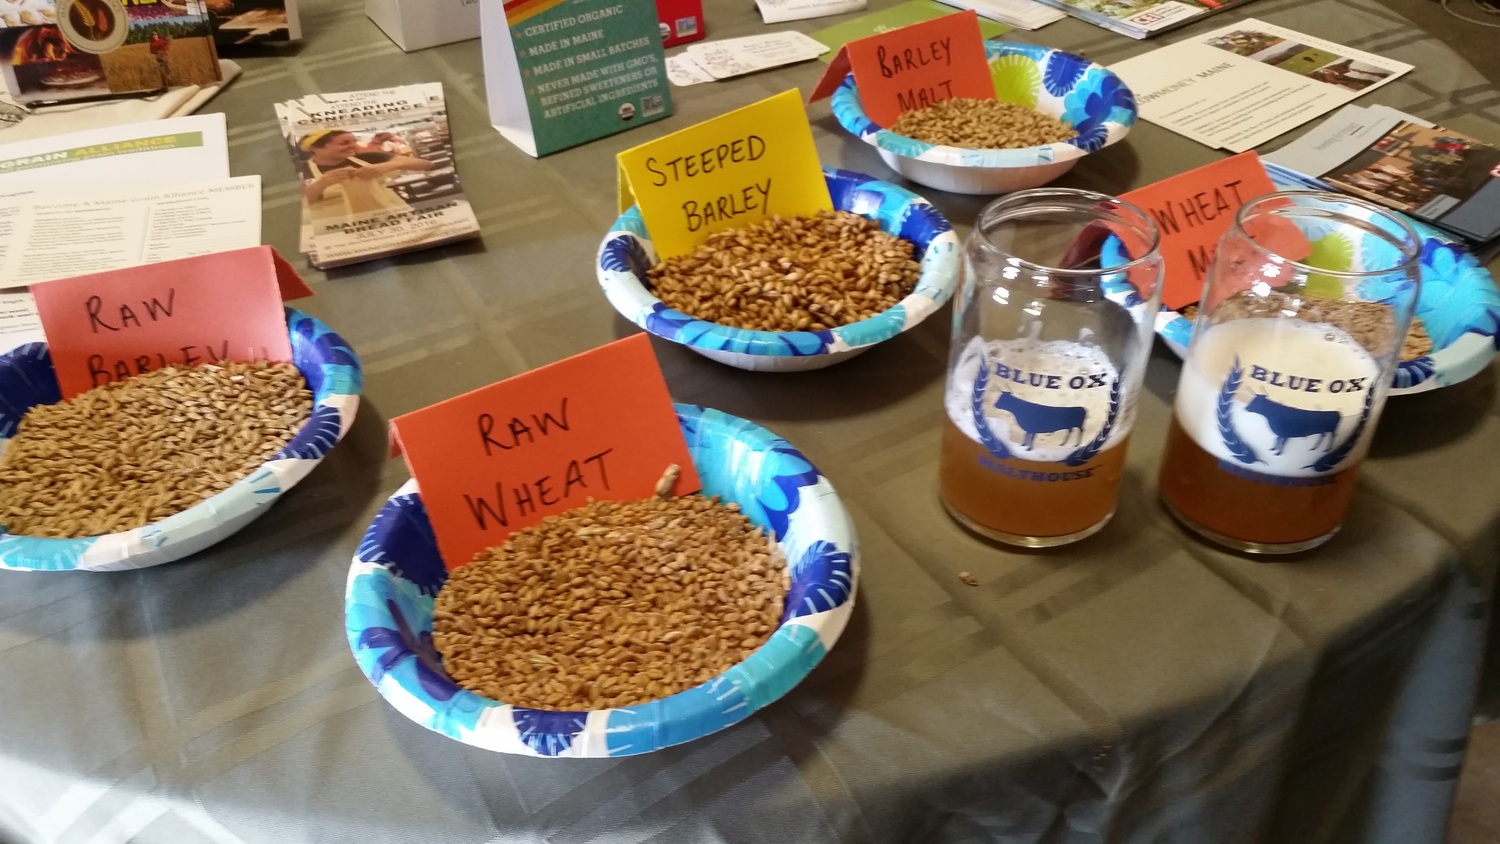  Examples of raw and malted grains were on display. Also, wheat and pale ale beers utilizing Blue Ox malts and brewed by Blank Canvas Brewery of Brewer, ME were offered as samples. 